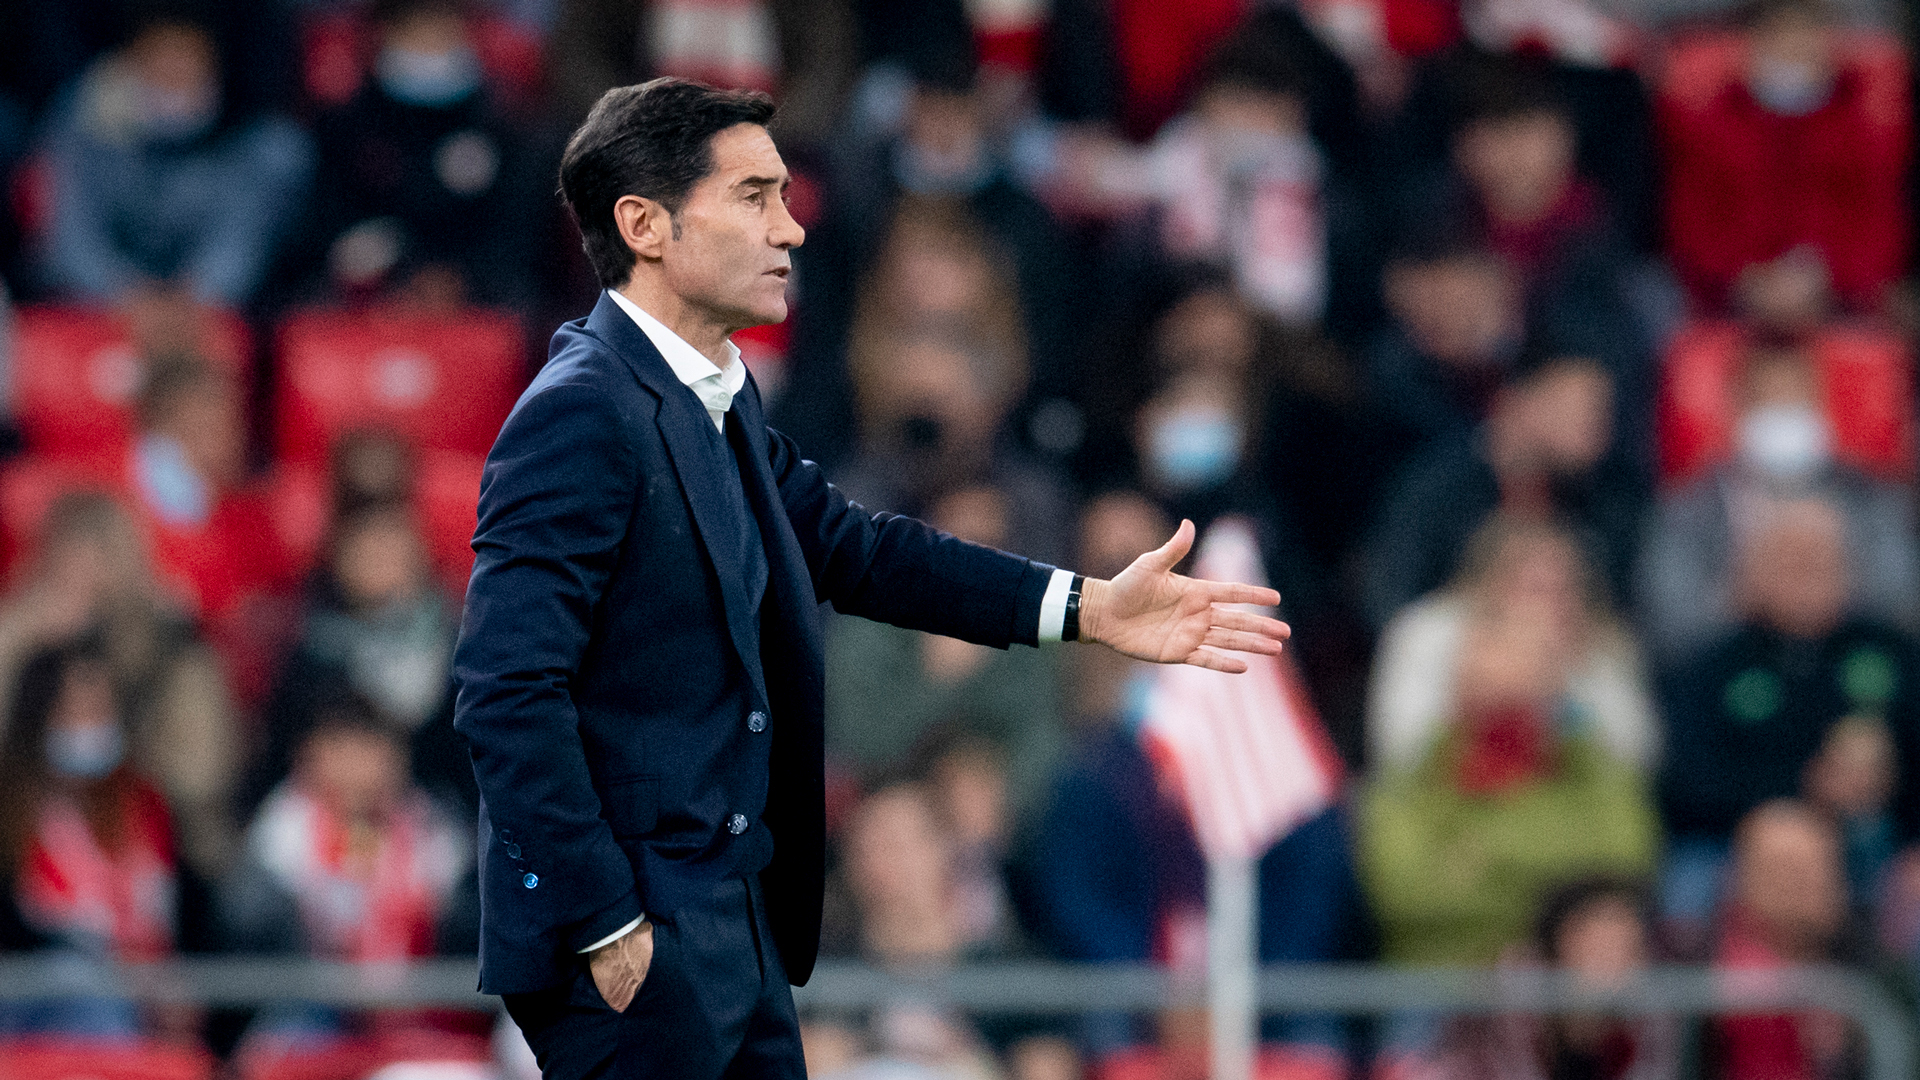 Marcelino: “I’ve got no complaints about the work we put in”